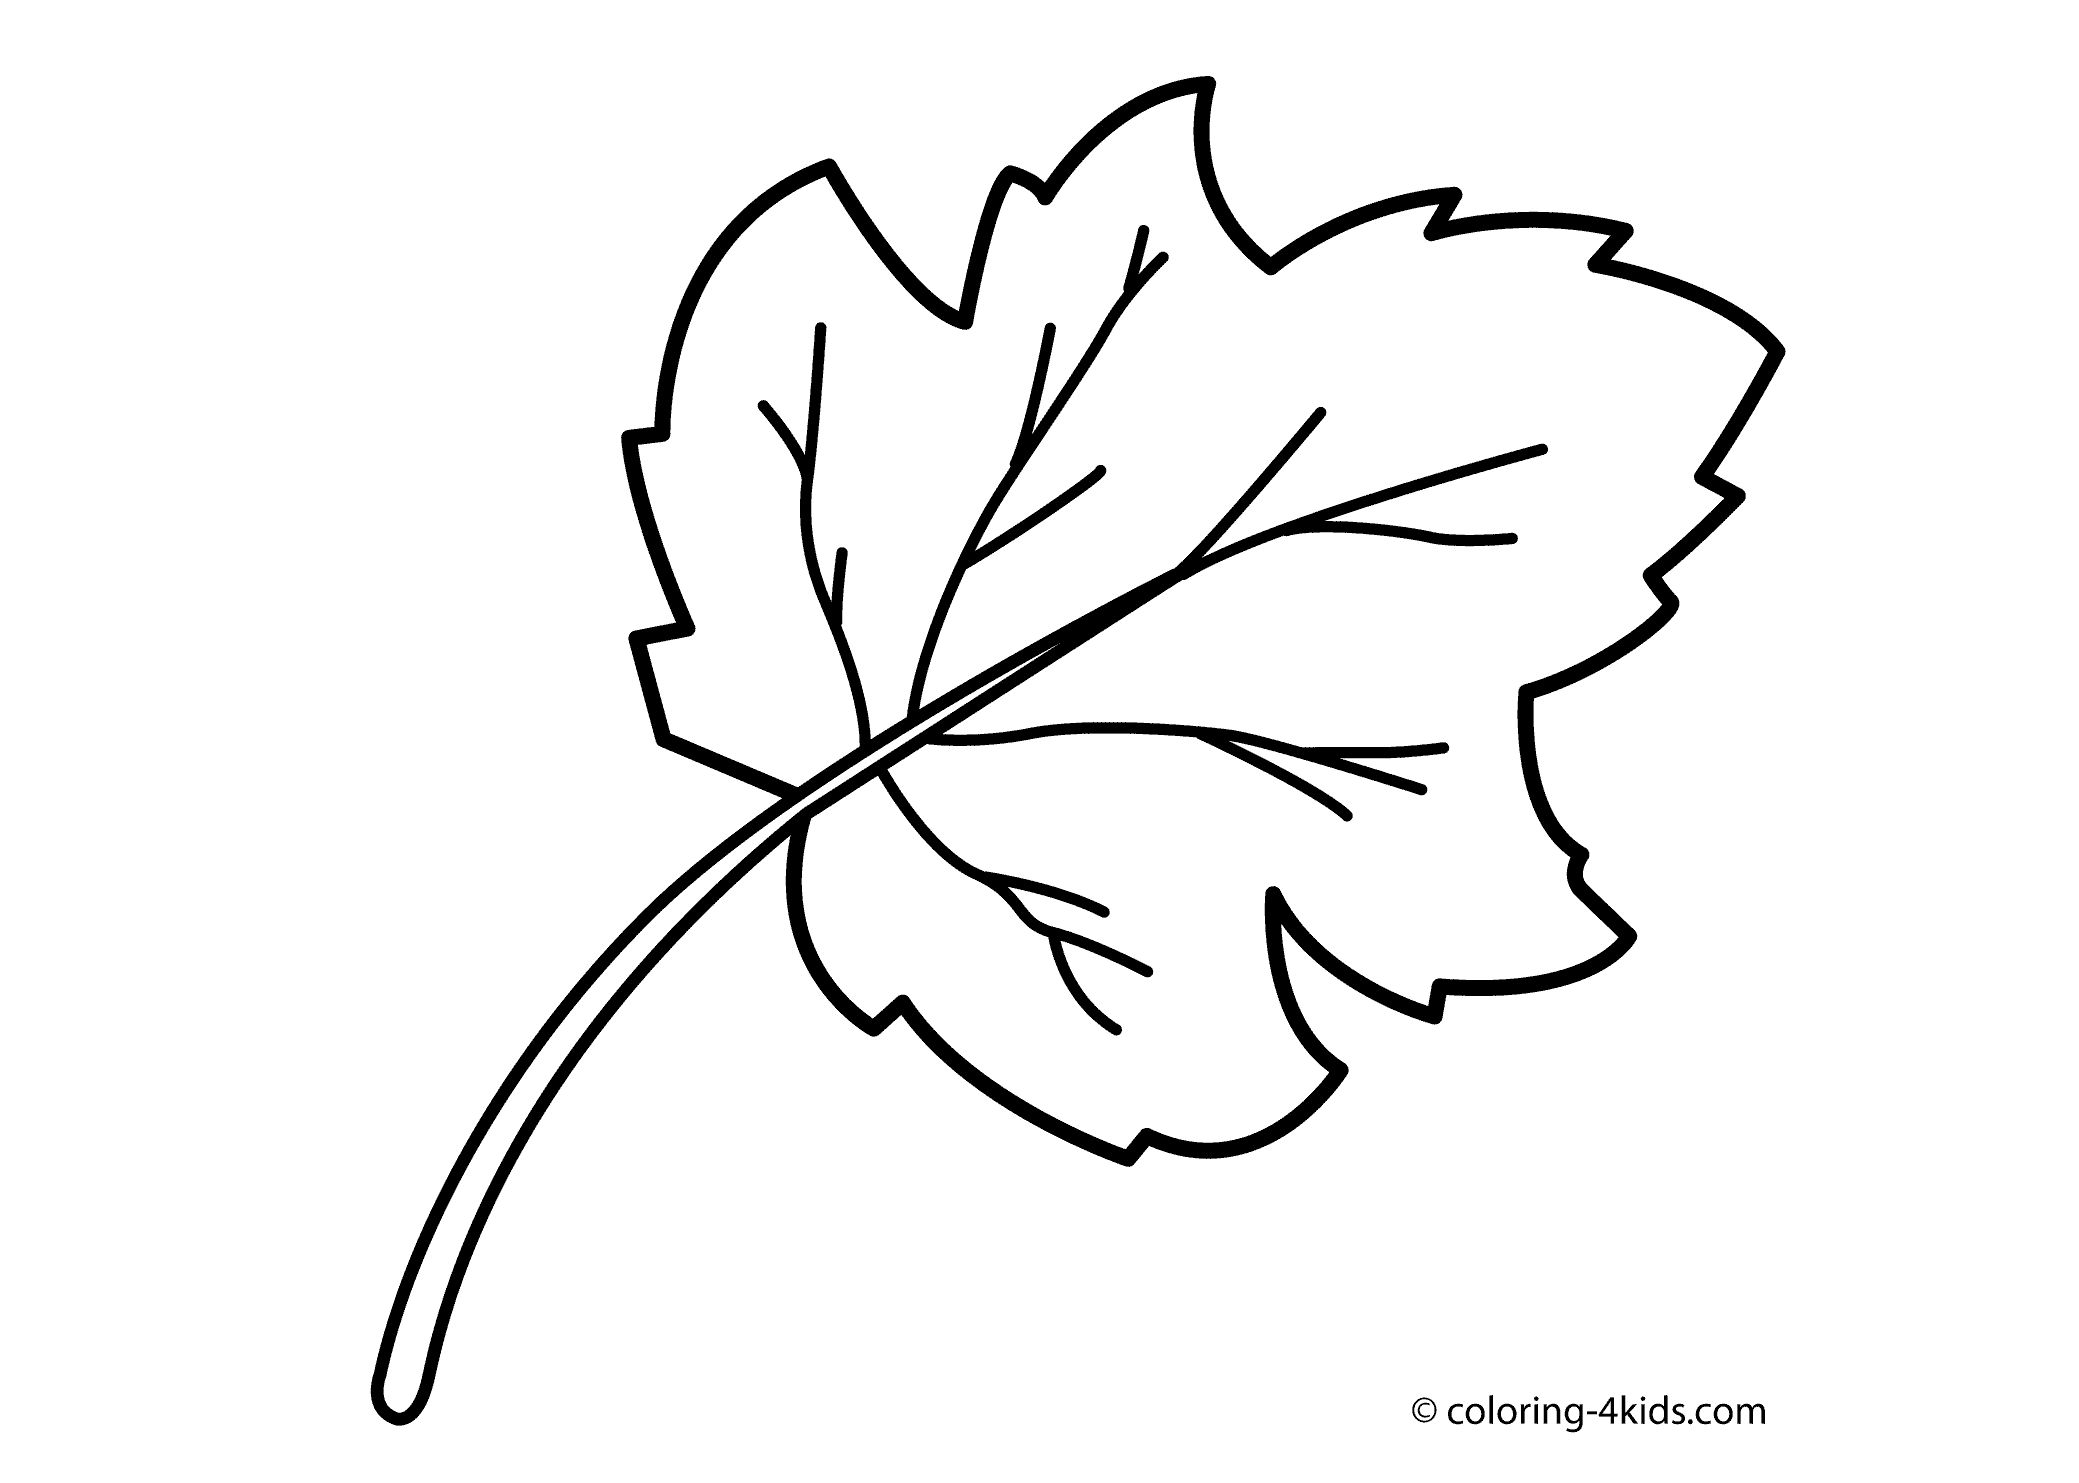 Trees And Leaves Coloring Pages - Coloring Home